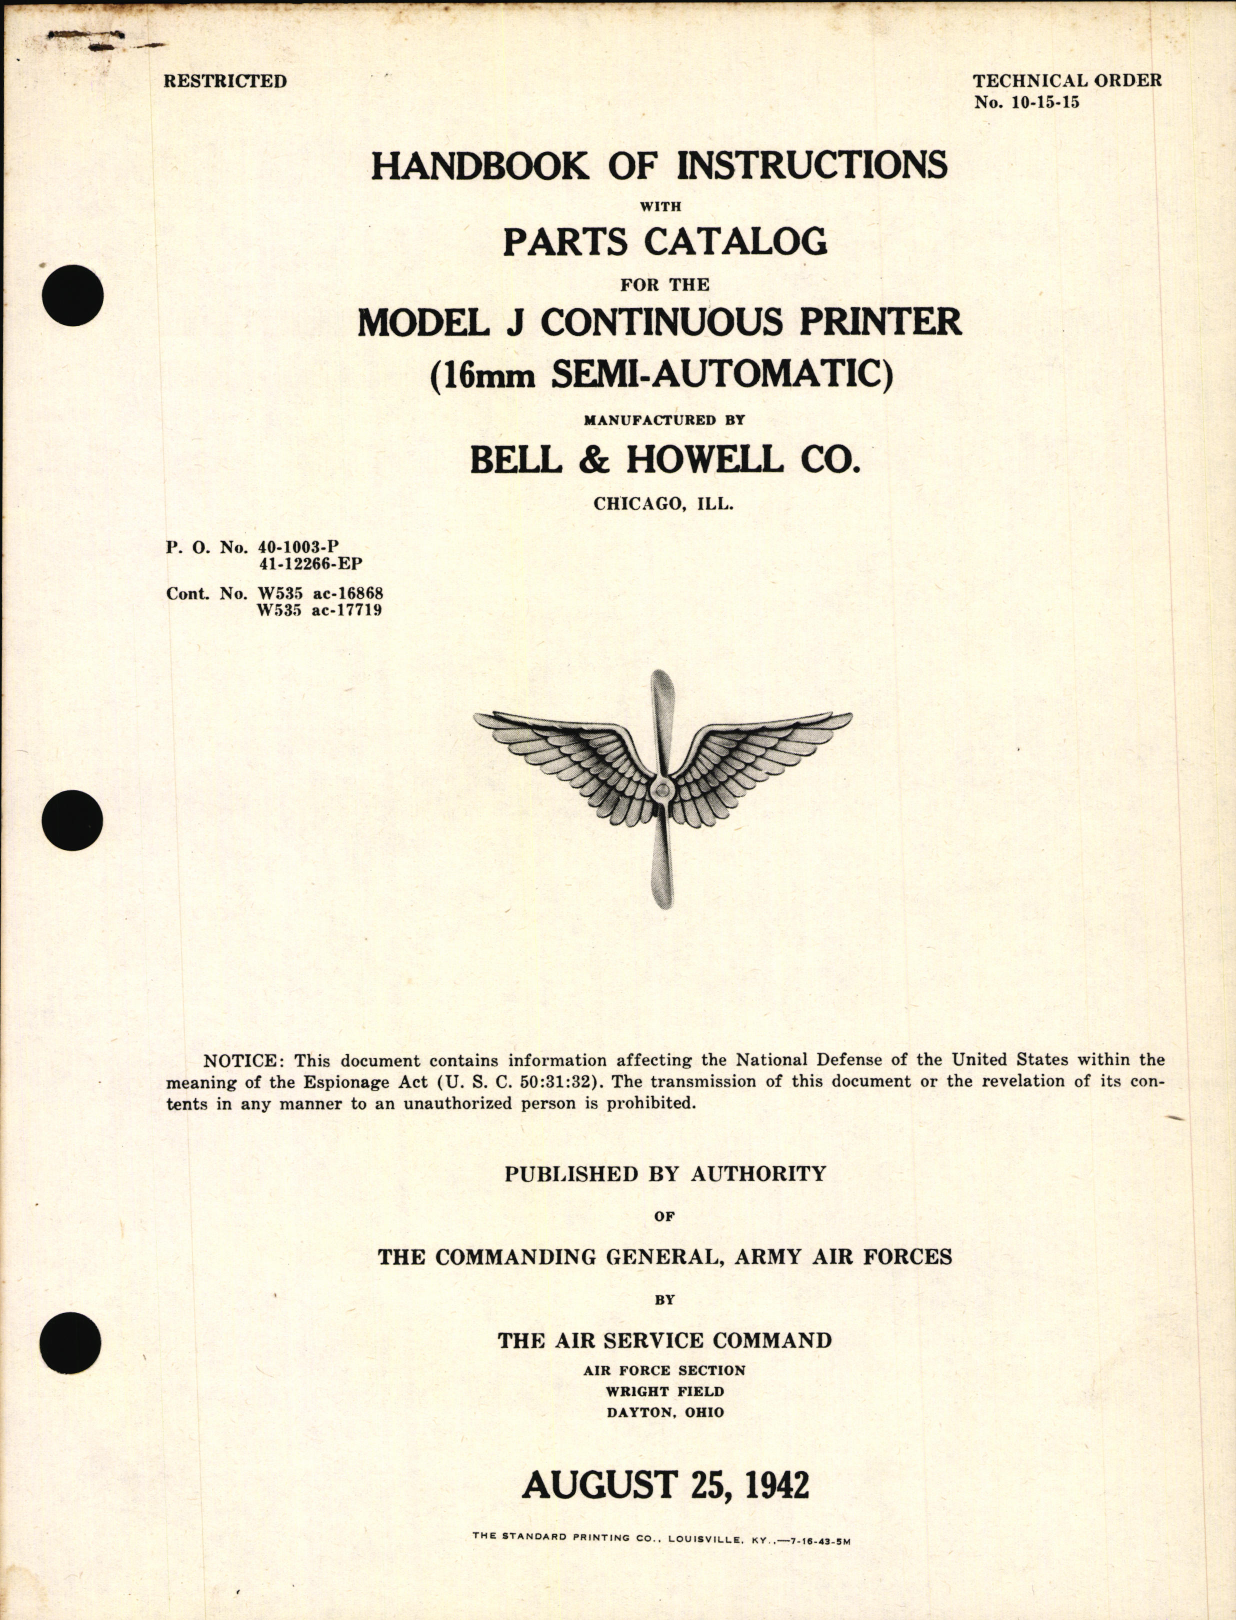 Sample page 1 from AirCorps Library document: Handbook of Instructions with Parts Catalog for Model J Continuous Printer (16 mm Semi-Automatic)